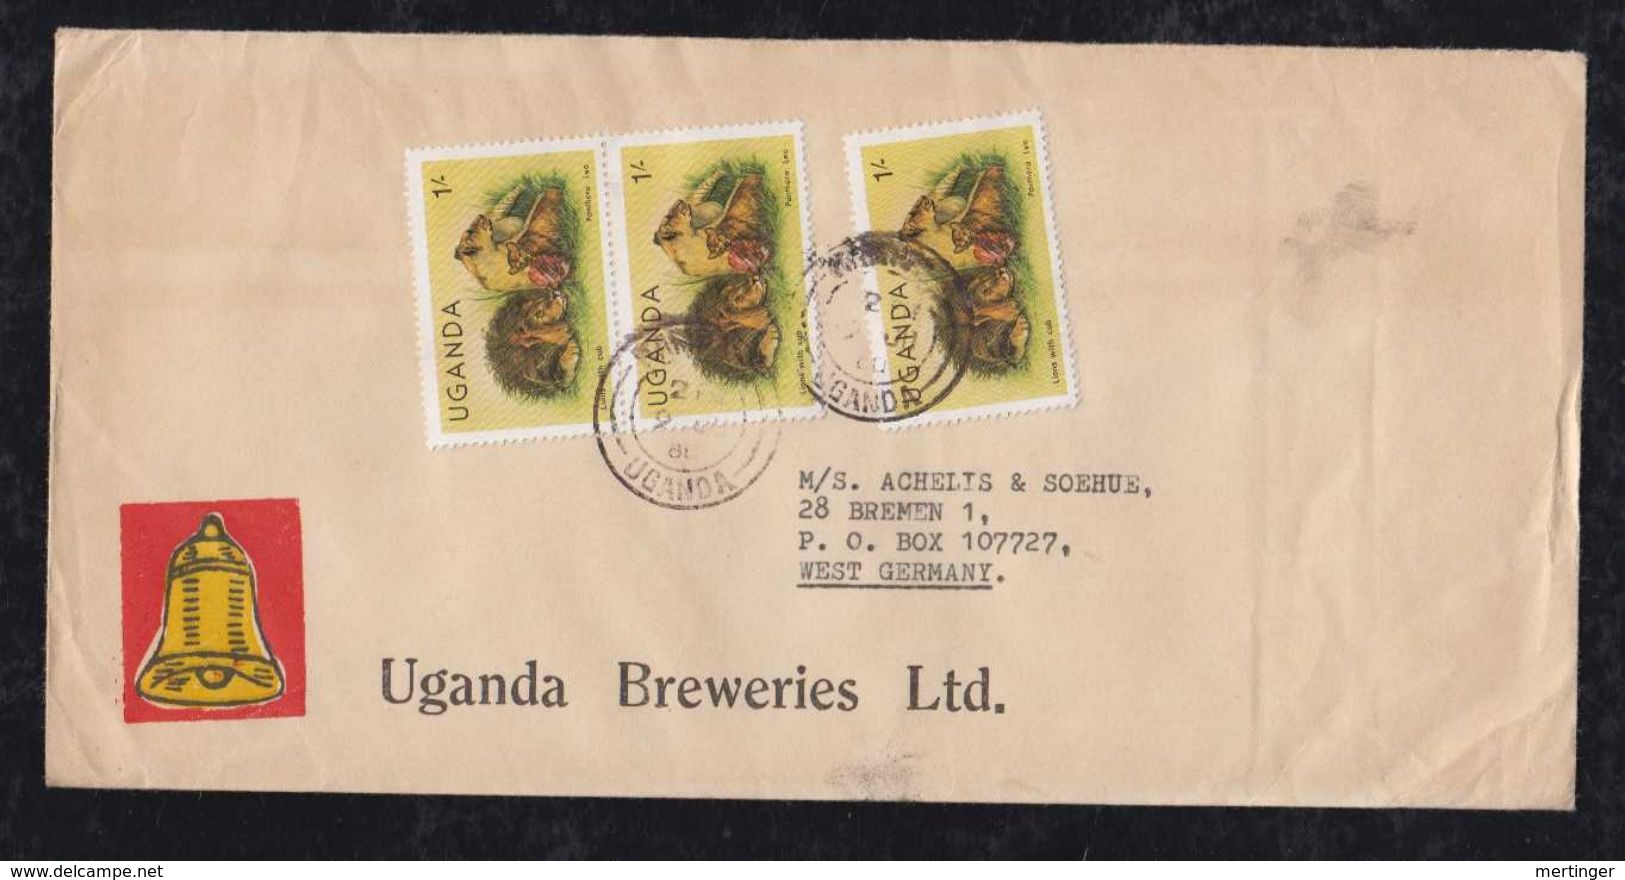 Uganda 1980 Airmail Cover KAMPALA To BREMEN Germany Brewery Beer Advertising 3x 2Sh Lion Stamp - Bières